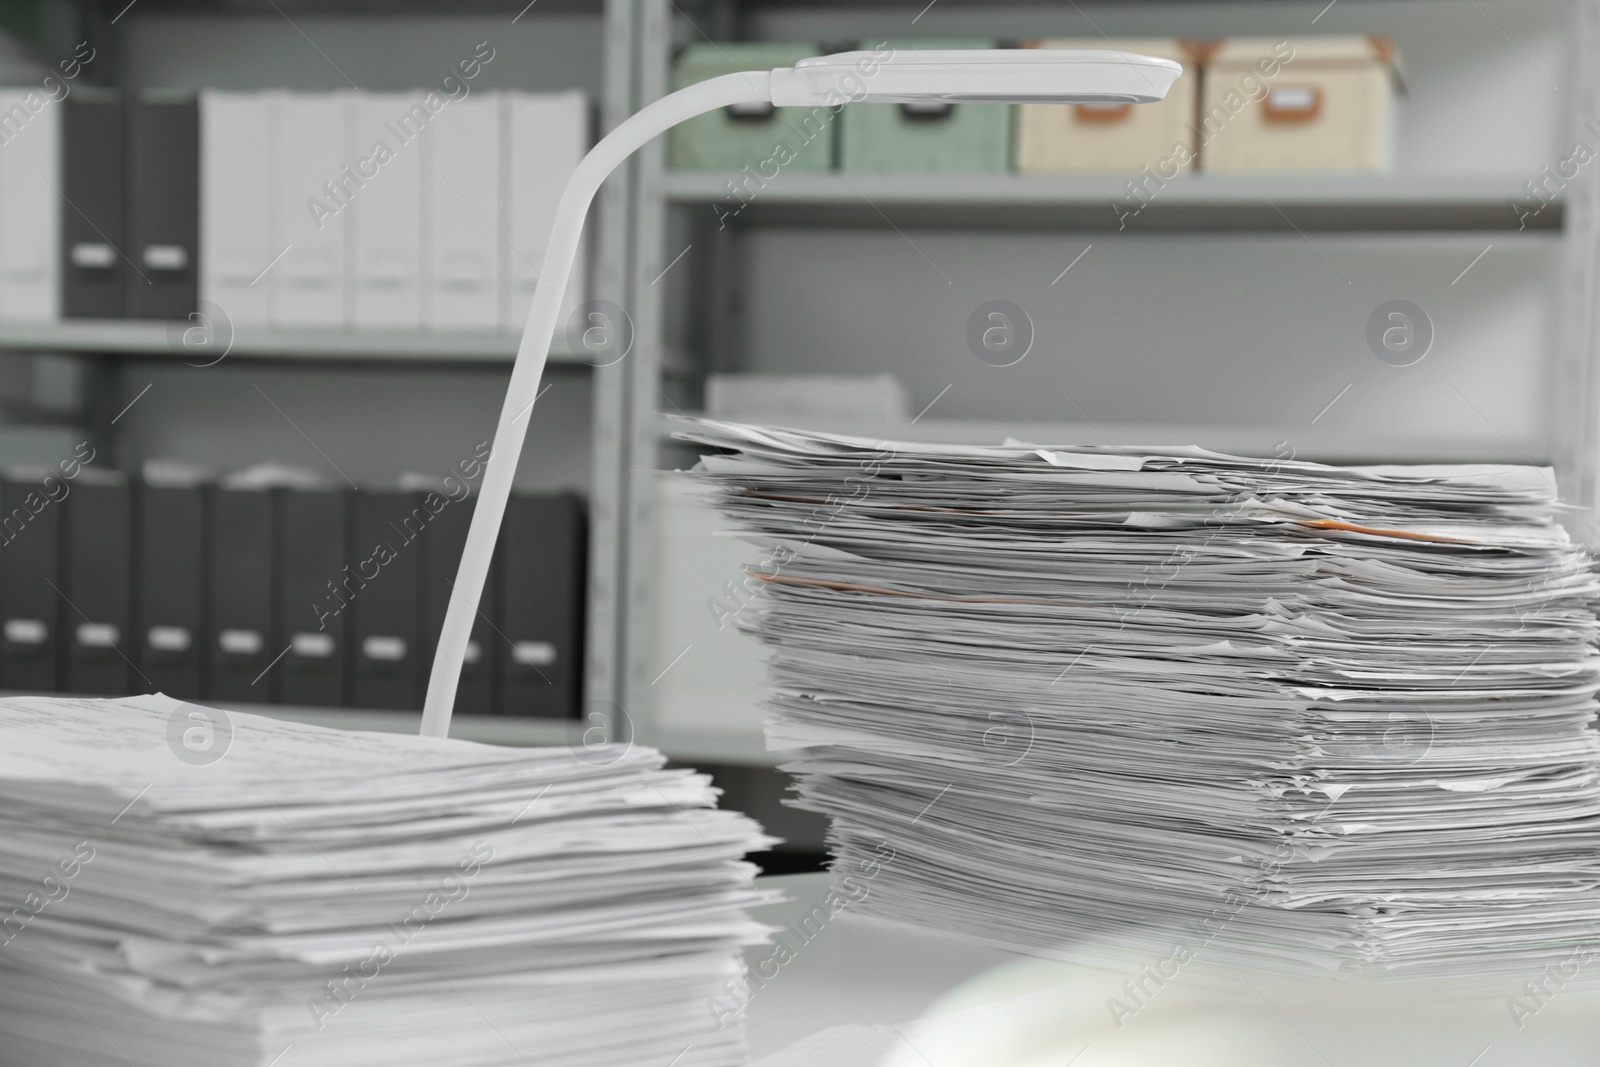 Photo of Stacks of documents on table in office